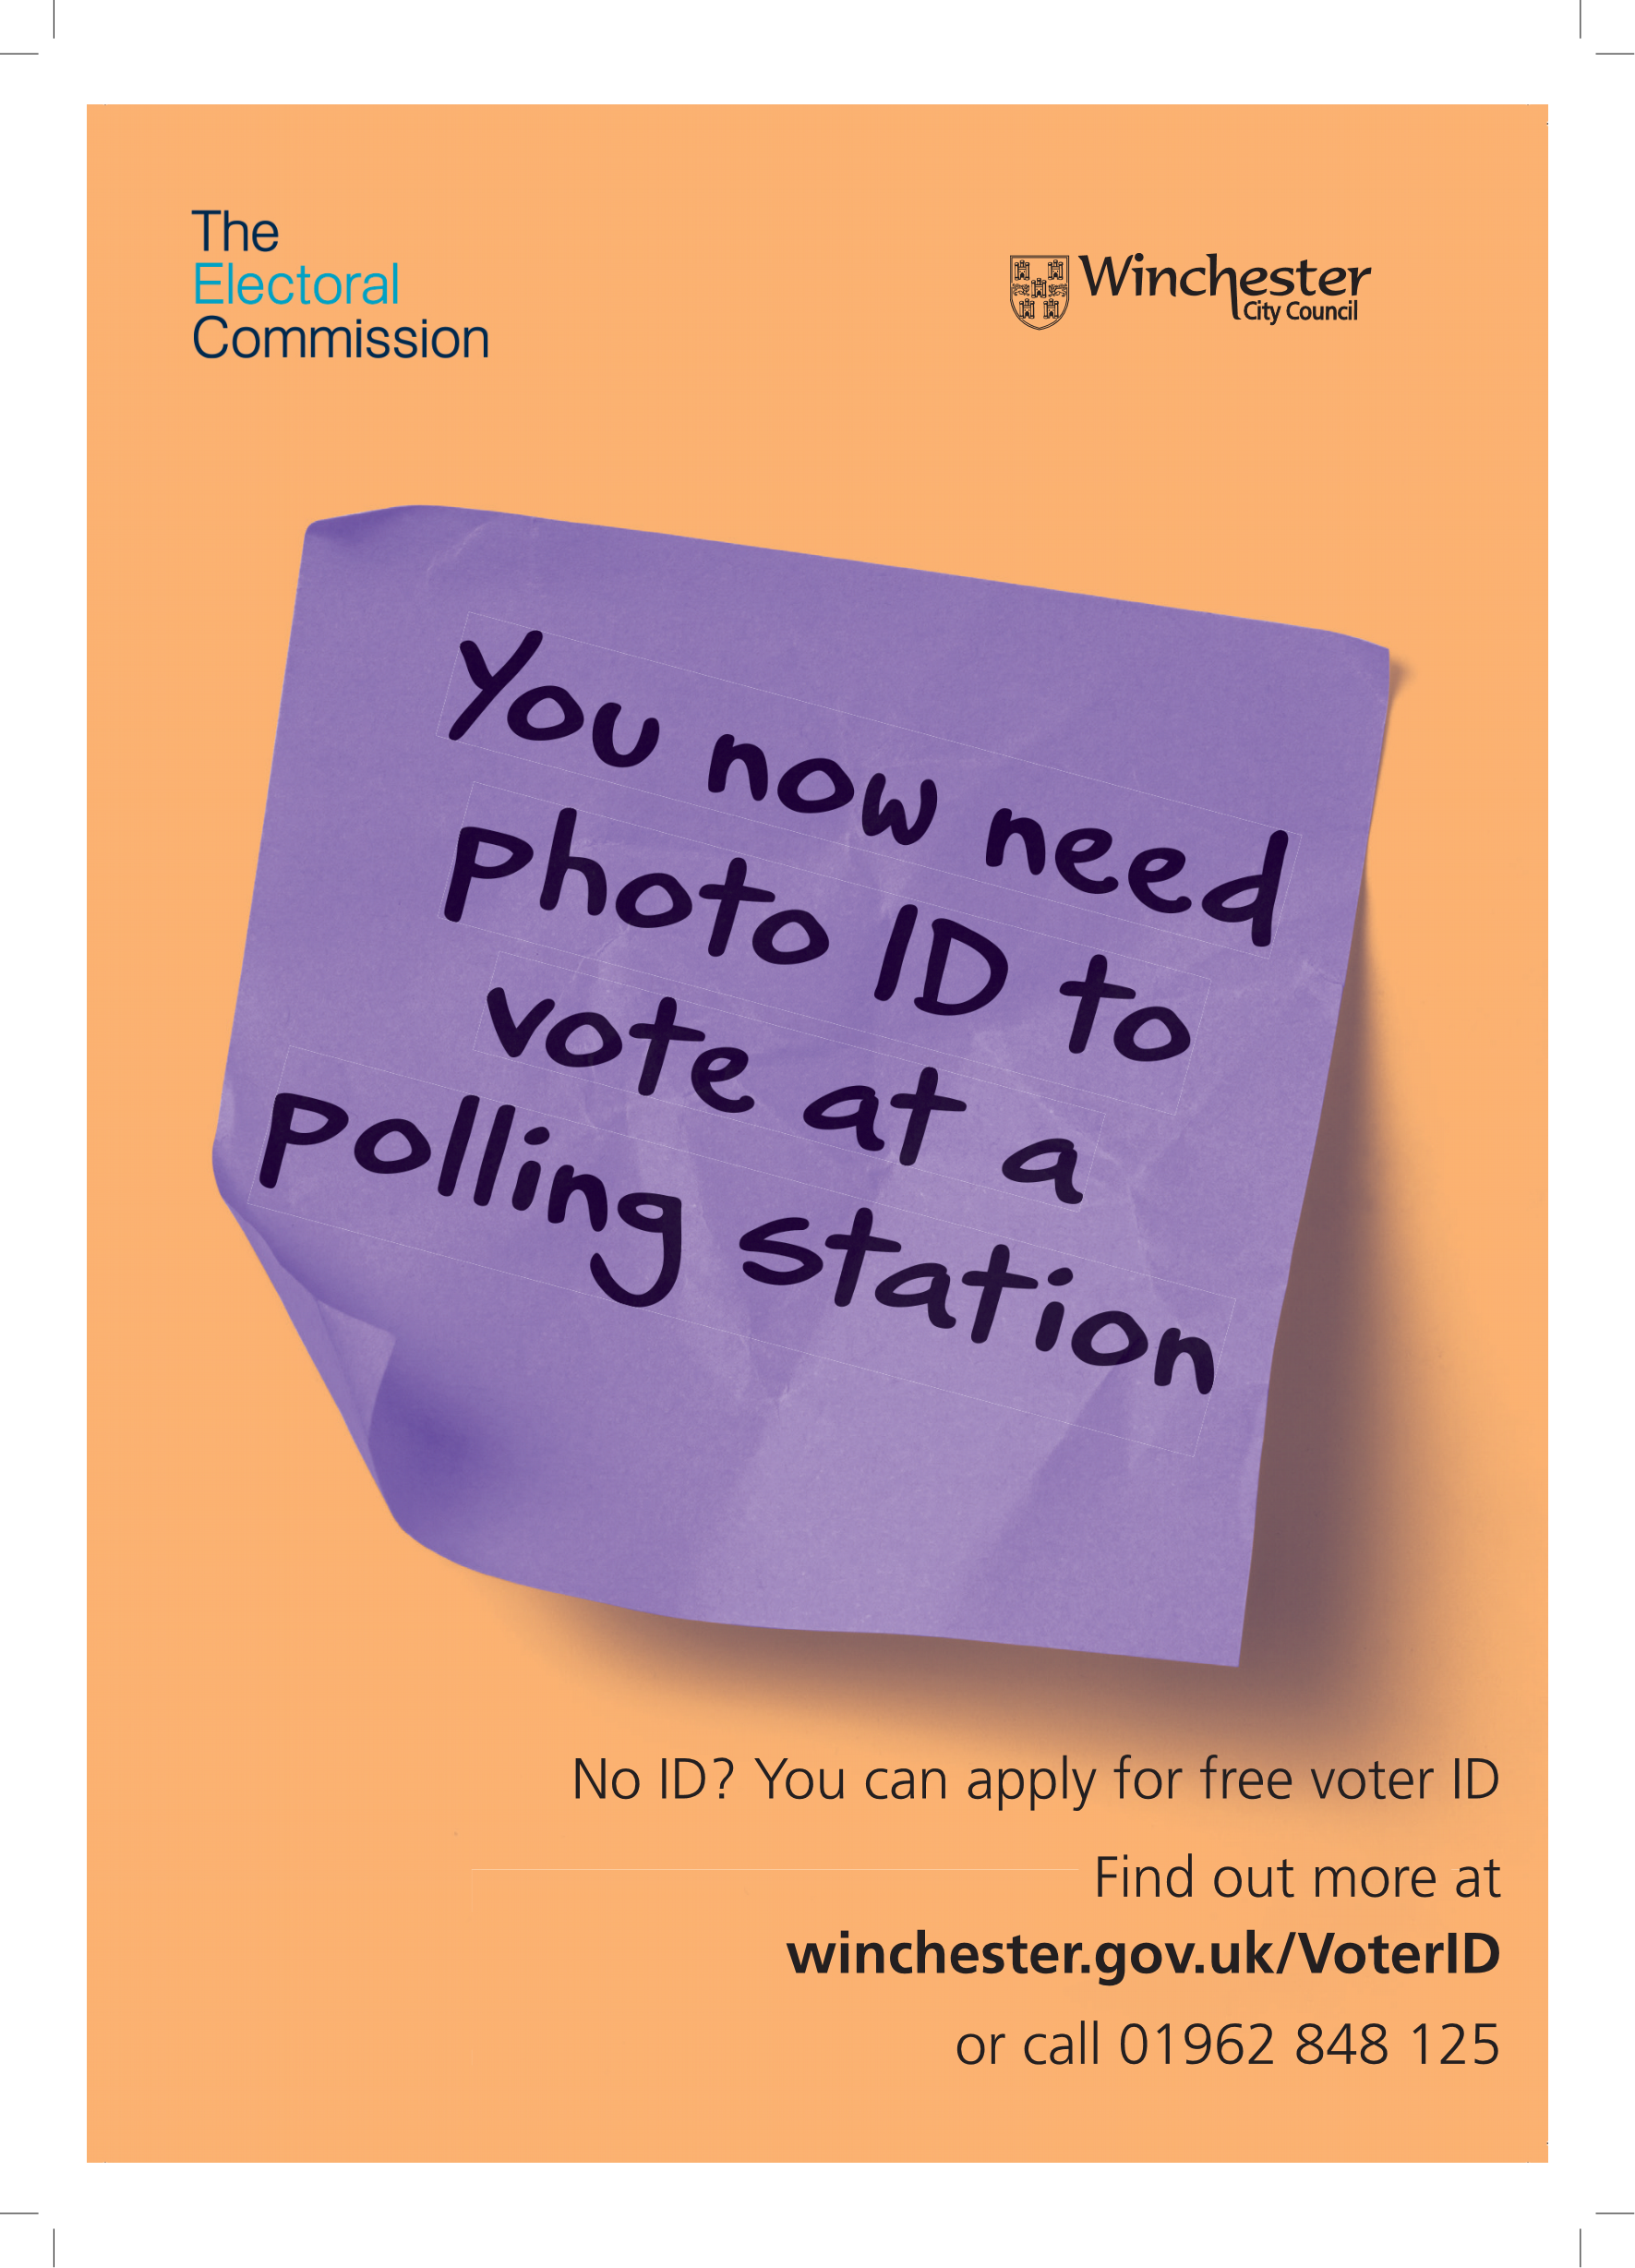 Voter ID – a new requirement